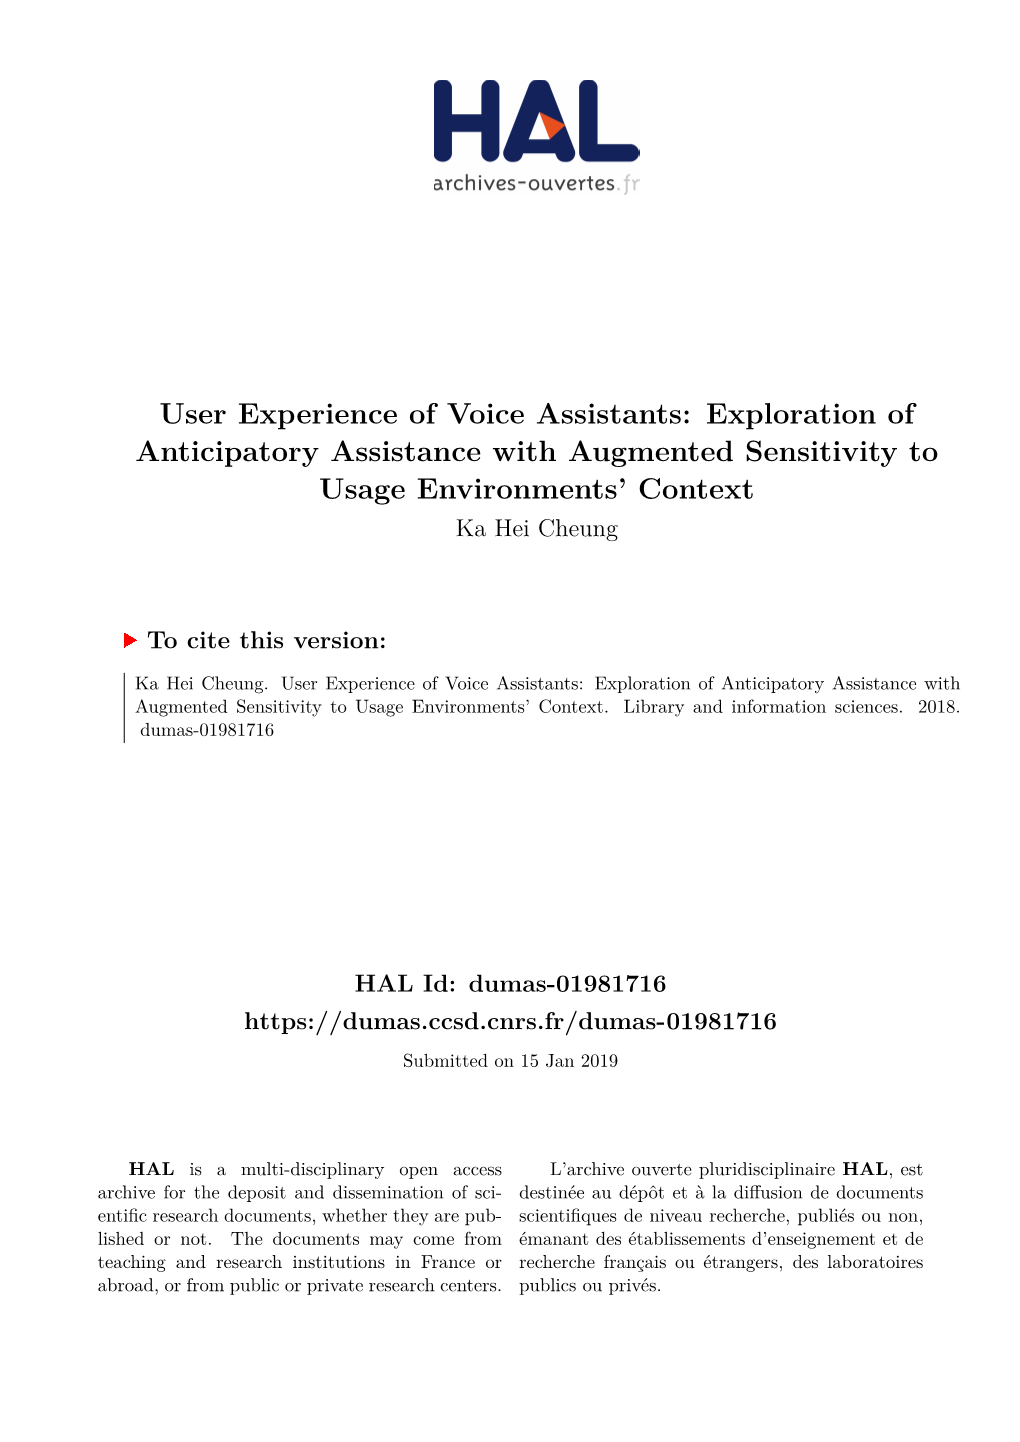 User Experience of Voice Assistants: Exploration of Anticipatory Assistance with Augmented Sensitivity to Usage Environments’ Context Ka Hei Cheung